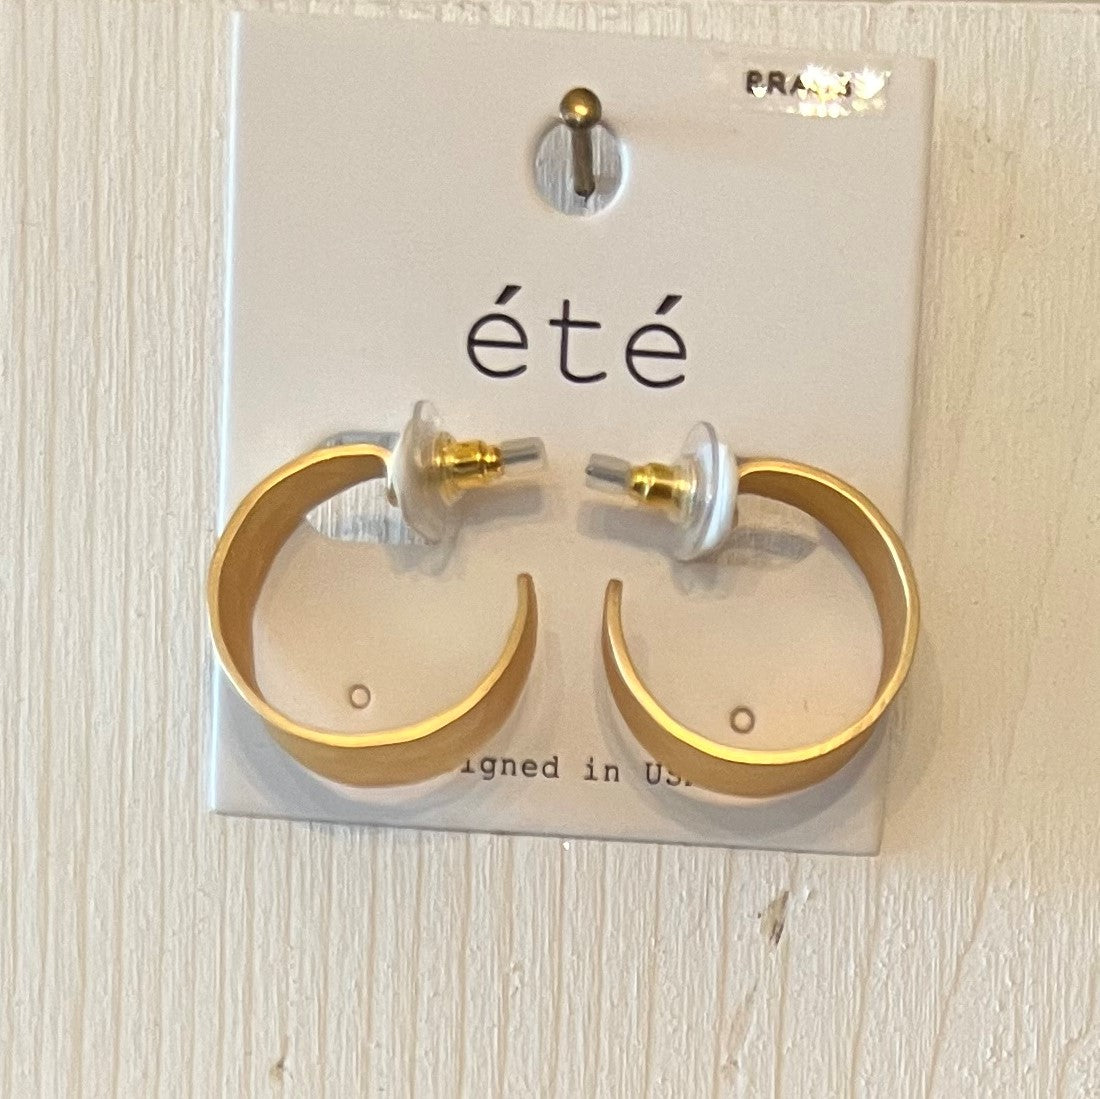 These hoop earrings are such a staple piece that everyone needs! They are posts with a hammered matte finish, and are 1" in diameter. A must have for your jewelry chest!